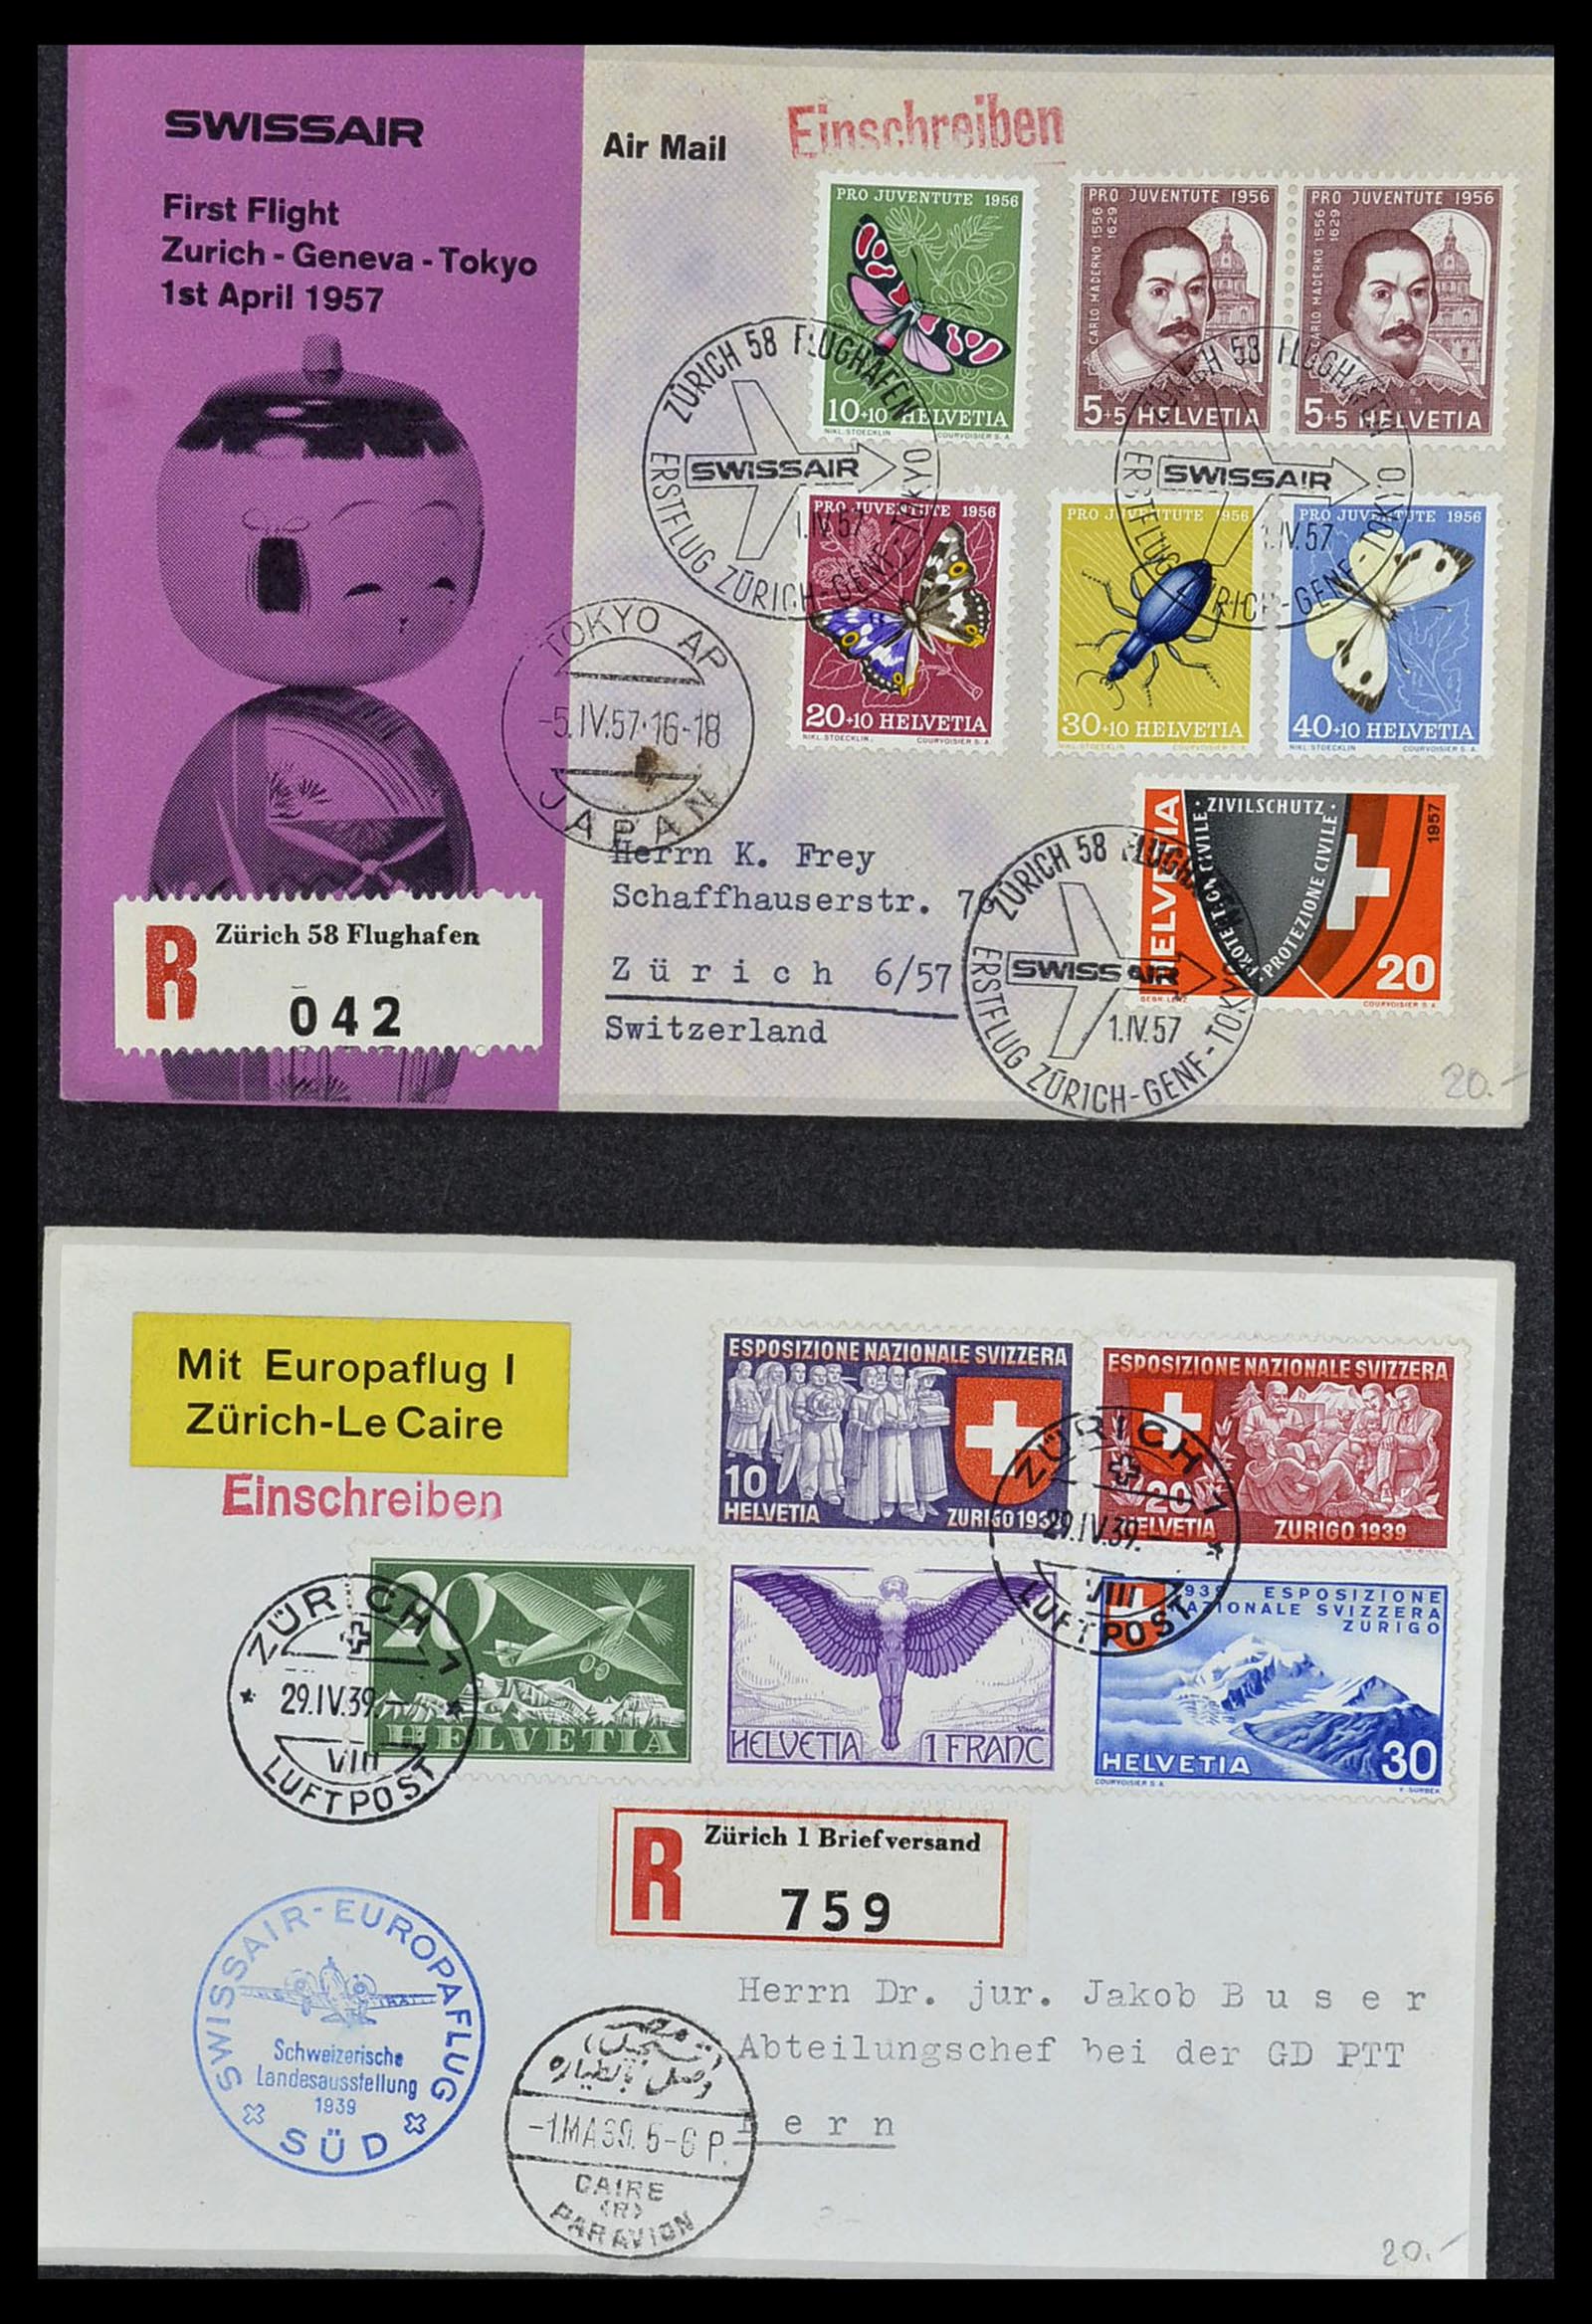 34141 077 - Stamp collection 34141 Switzerland airmail covers 1920-1960.